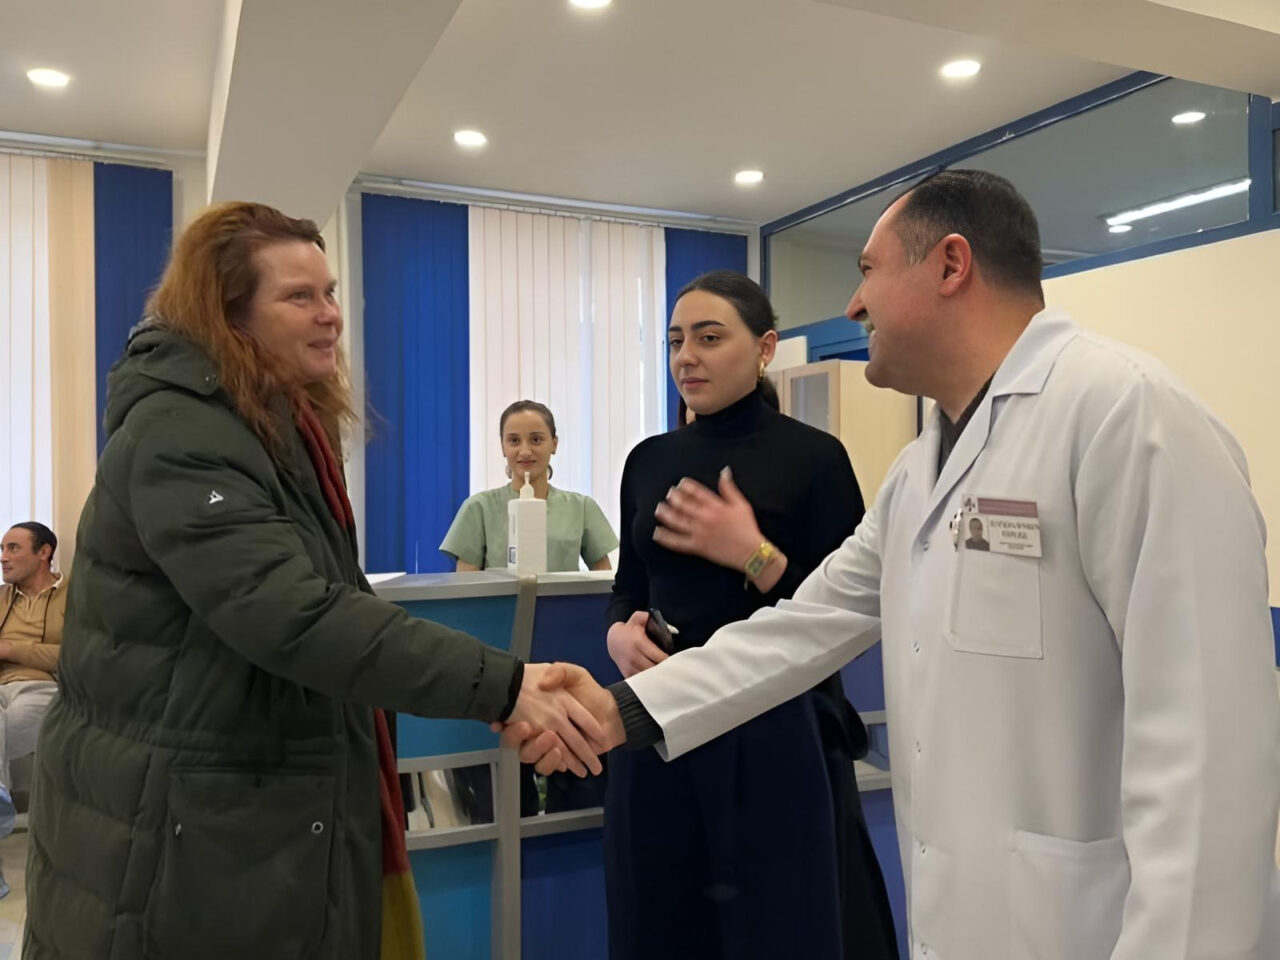 Tatevik Margaryan: The Blood Bank of Armenia is happy to have the Representative of RA United Nations office, Nanna Skau, as a volunteer blood donor